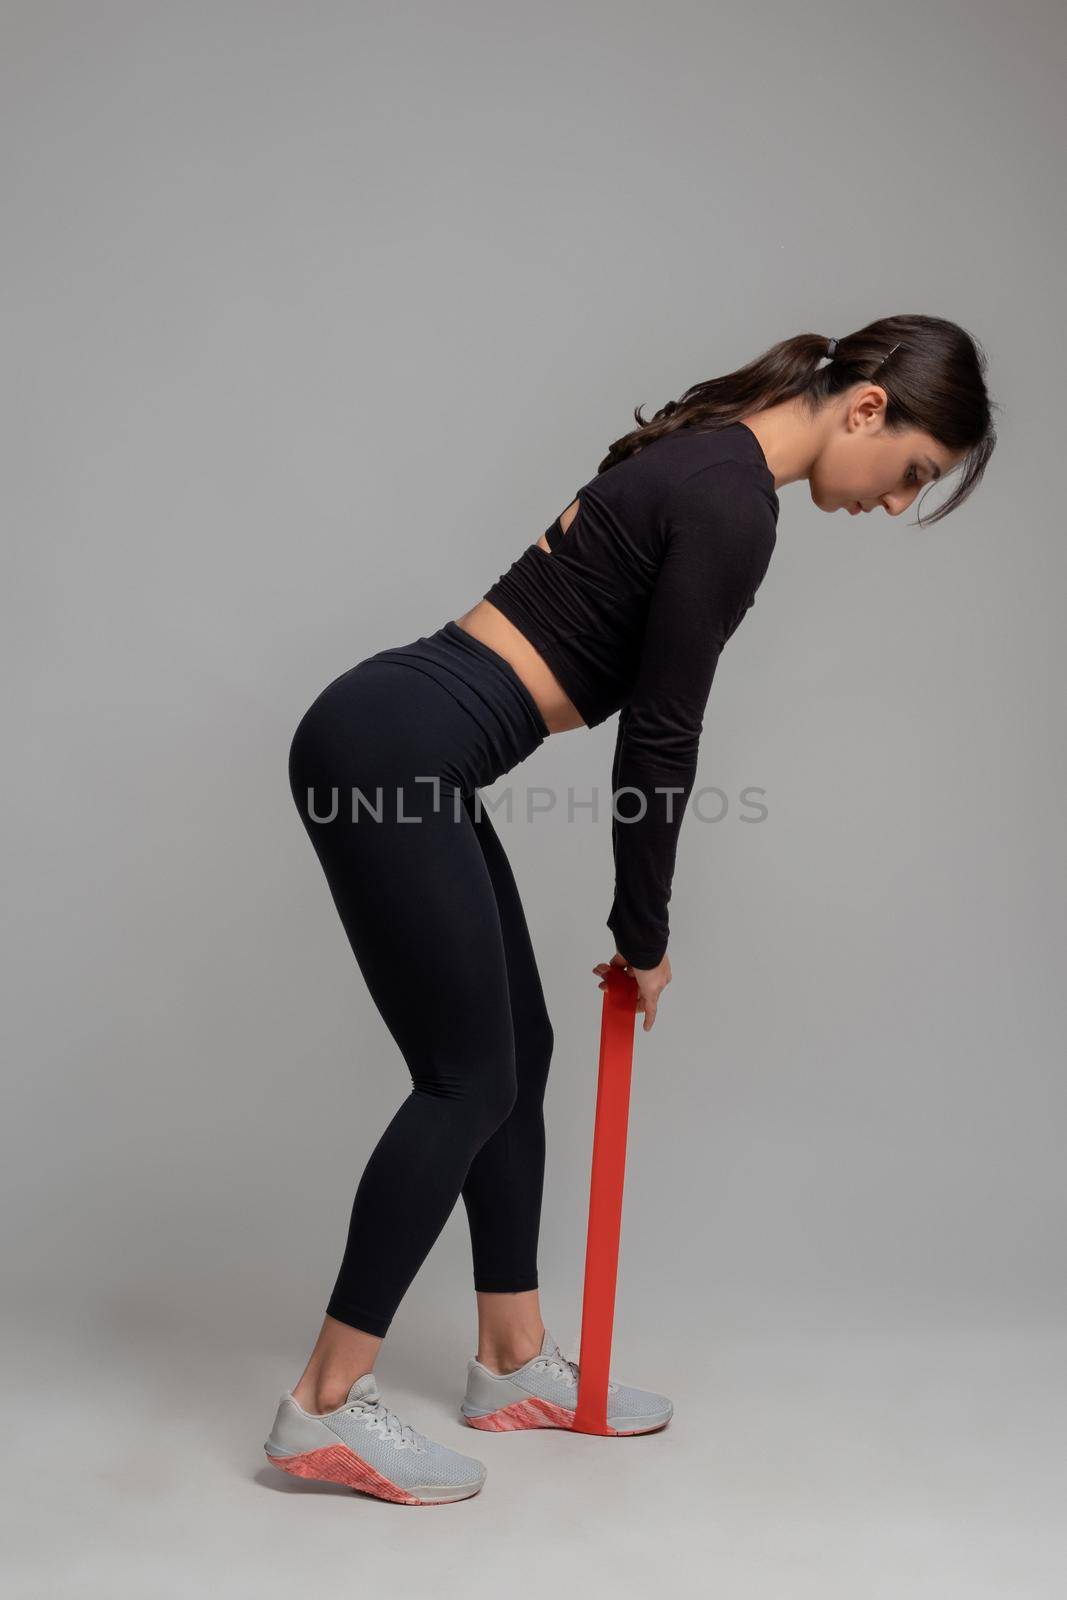 Sporty girl working out muscles of legs and glutes, doing Romanian resistance loop deadlift in studio on grey background. Fitness and sports motivation concept